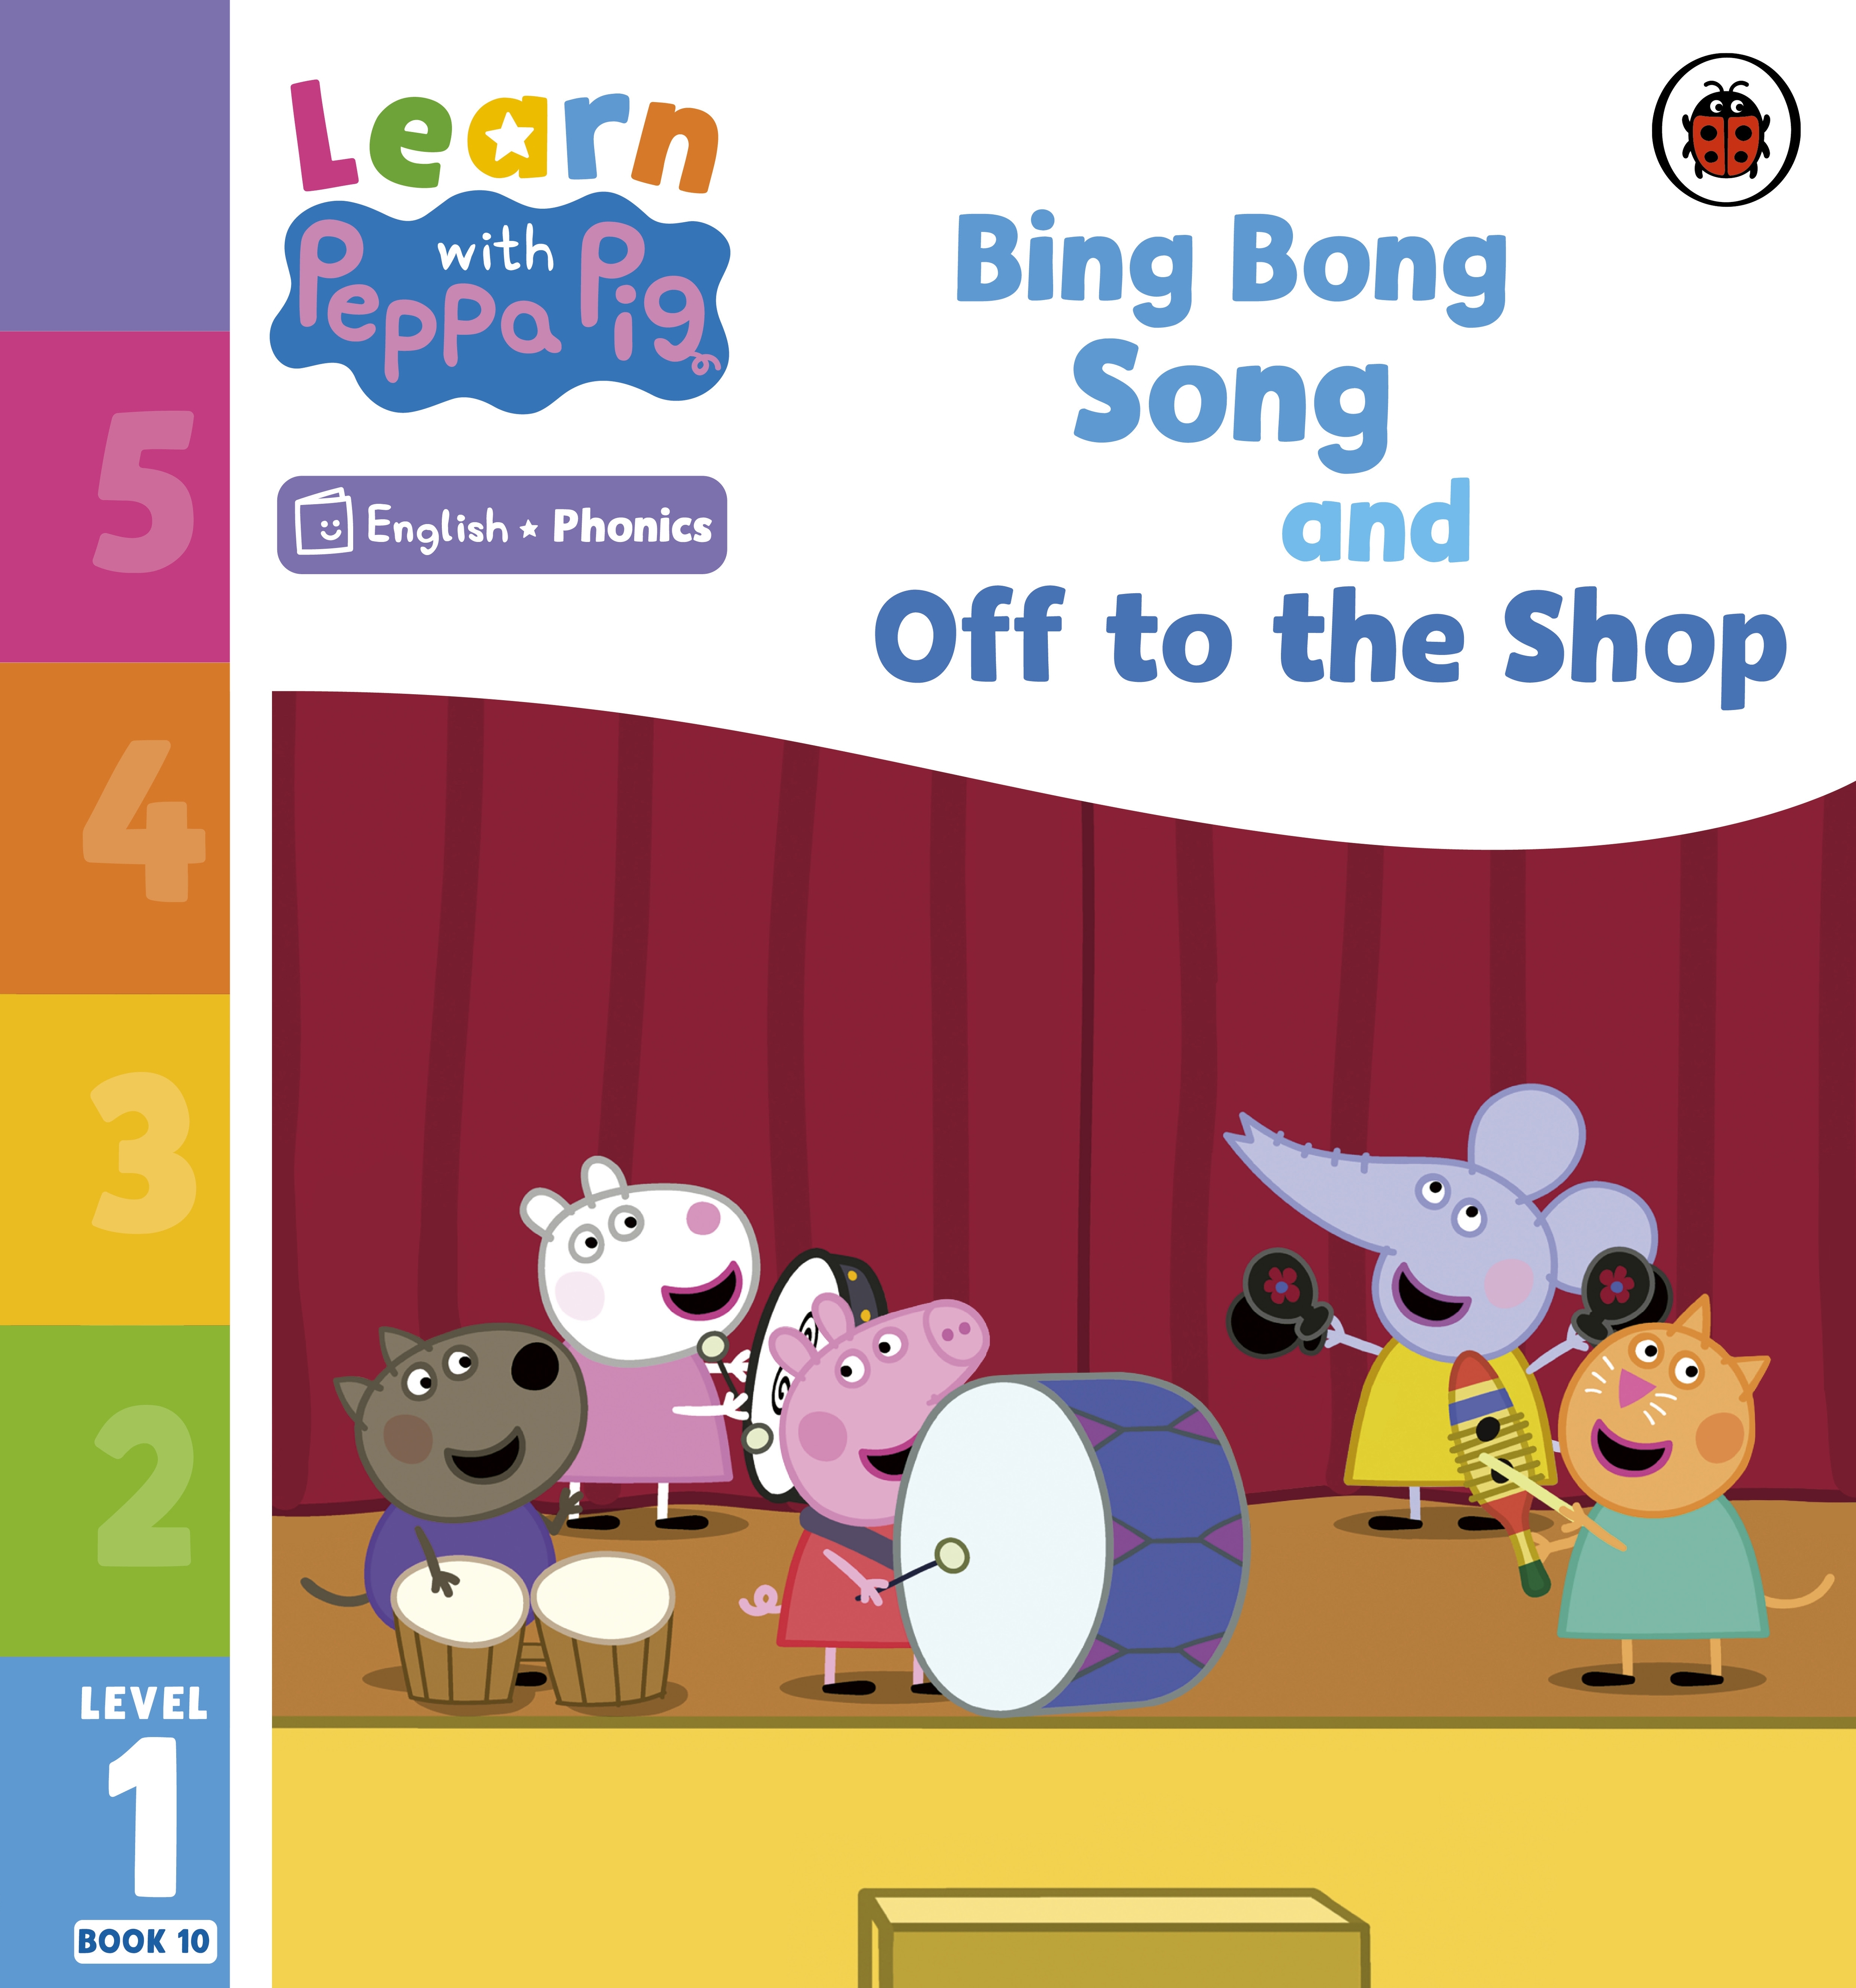 Learn with Peppa Phonics Level 1 Book 10 – Bing Bong Song and Off to the  Shop (Phonics Reader) by Peppa Pig - Penguin Books Australia